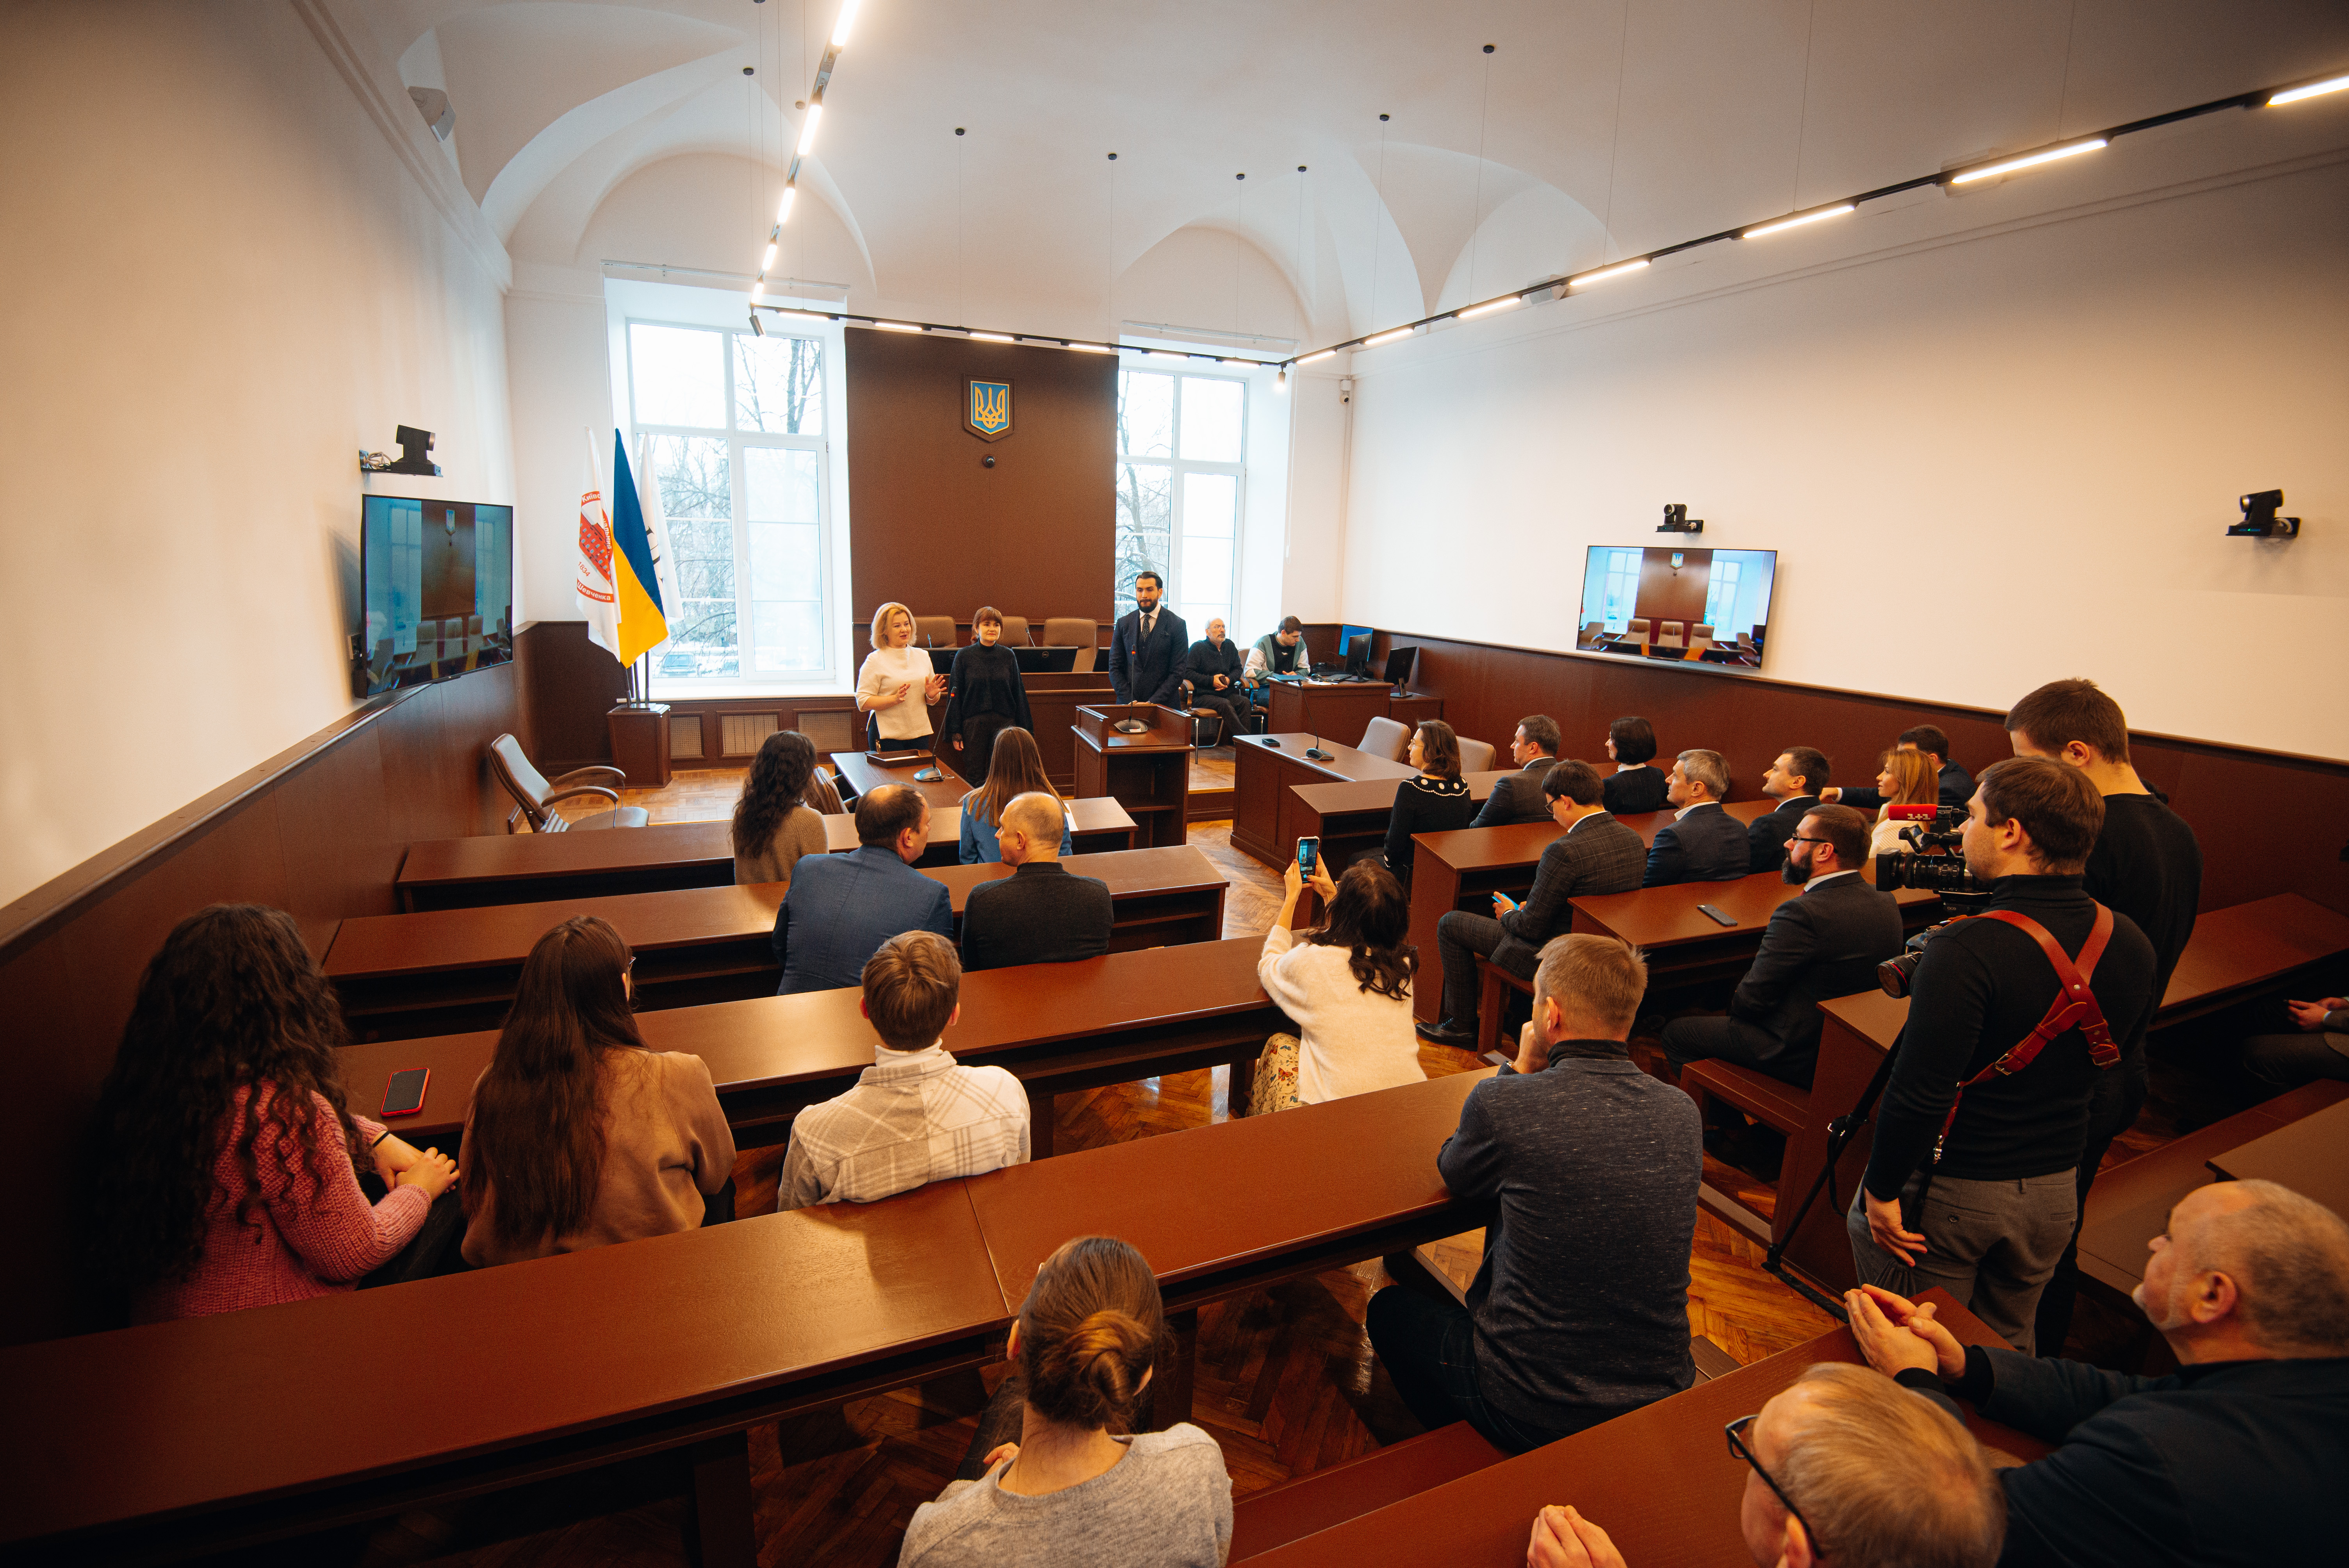 EQUITY Law Firm together with the Institute of Law of Taras Shevchenko National University of Kyiv opened a courtroom!